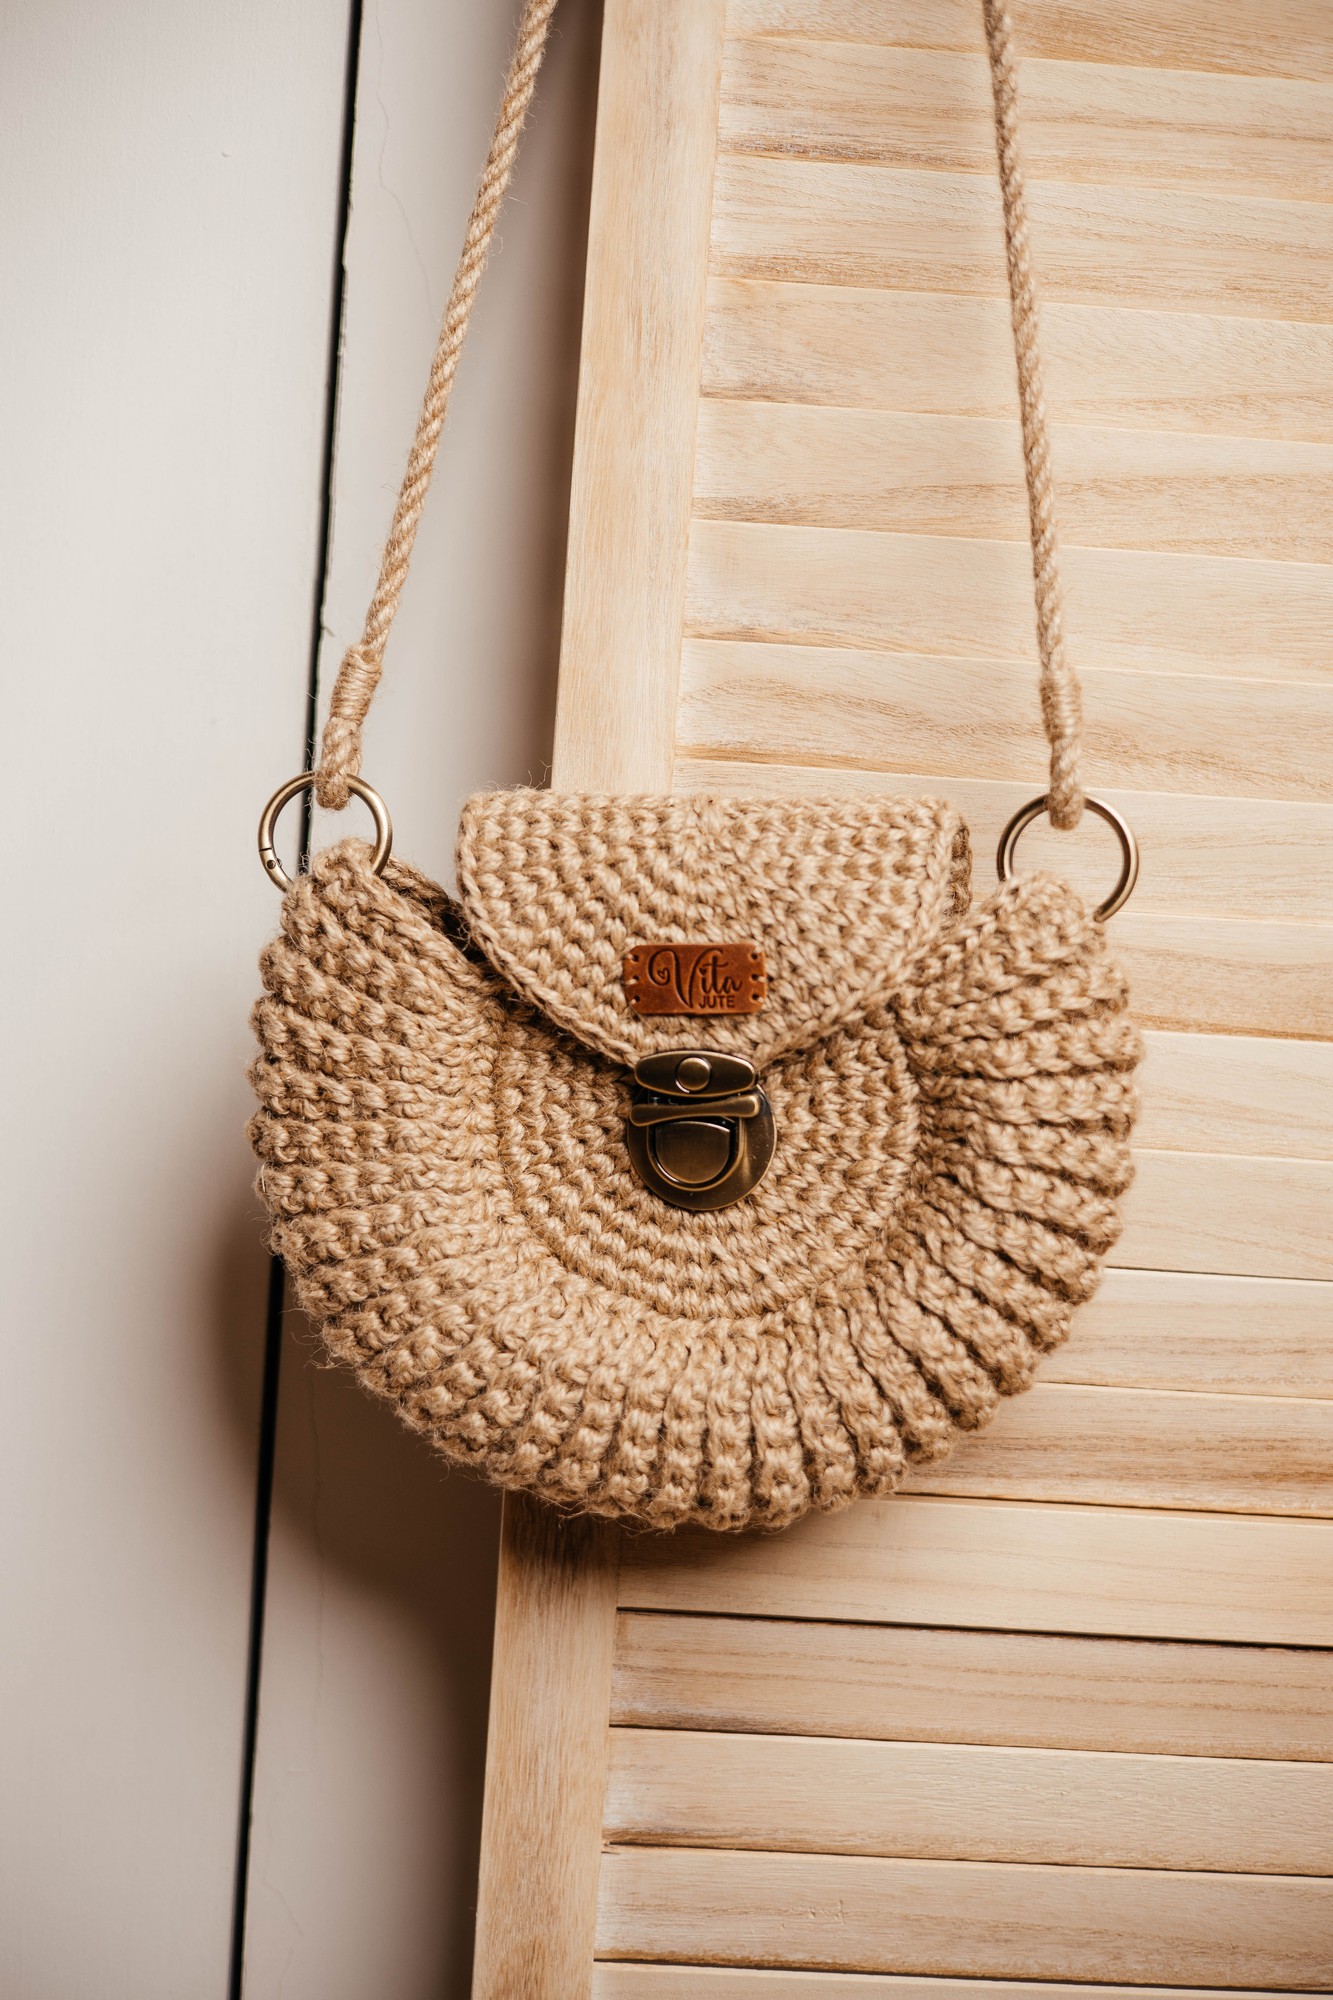 Knitted jute clutch made from eco-friendly jute